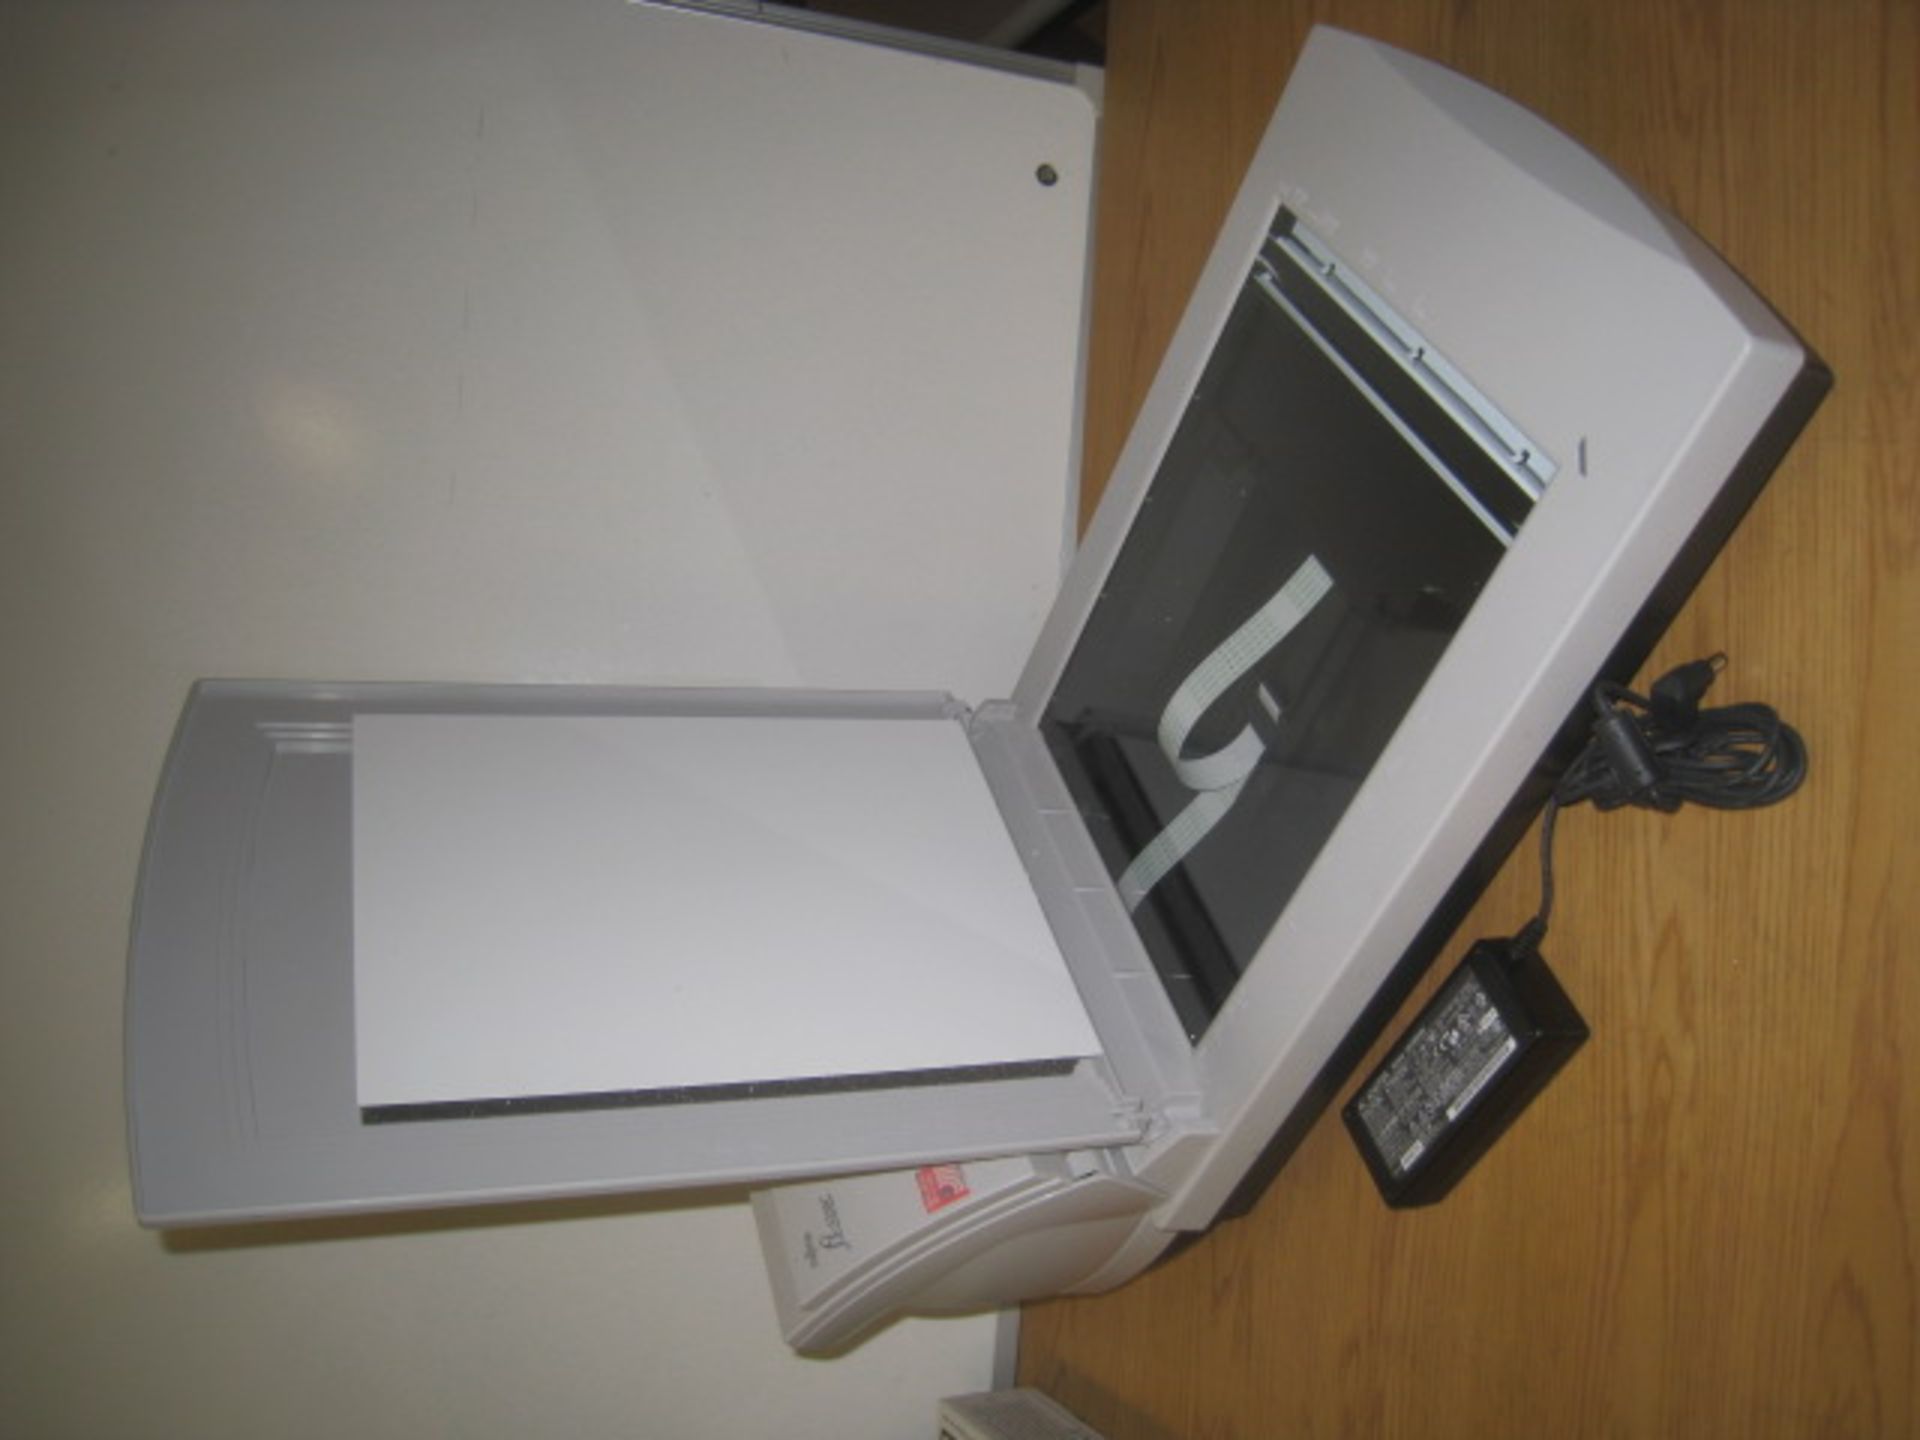 FUJITSU Fi-5220C HIGH SPEED DUPLEX COLOUR DOCUMENT FLATBED SCANNER. WITH PSU - Image 2 of 2